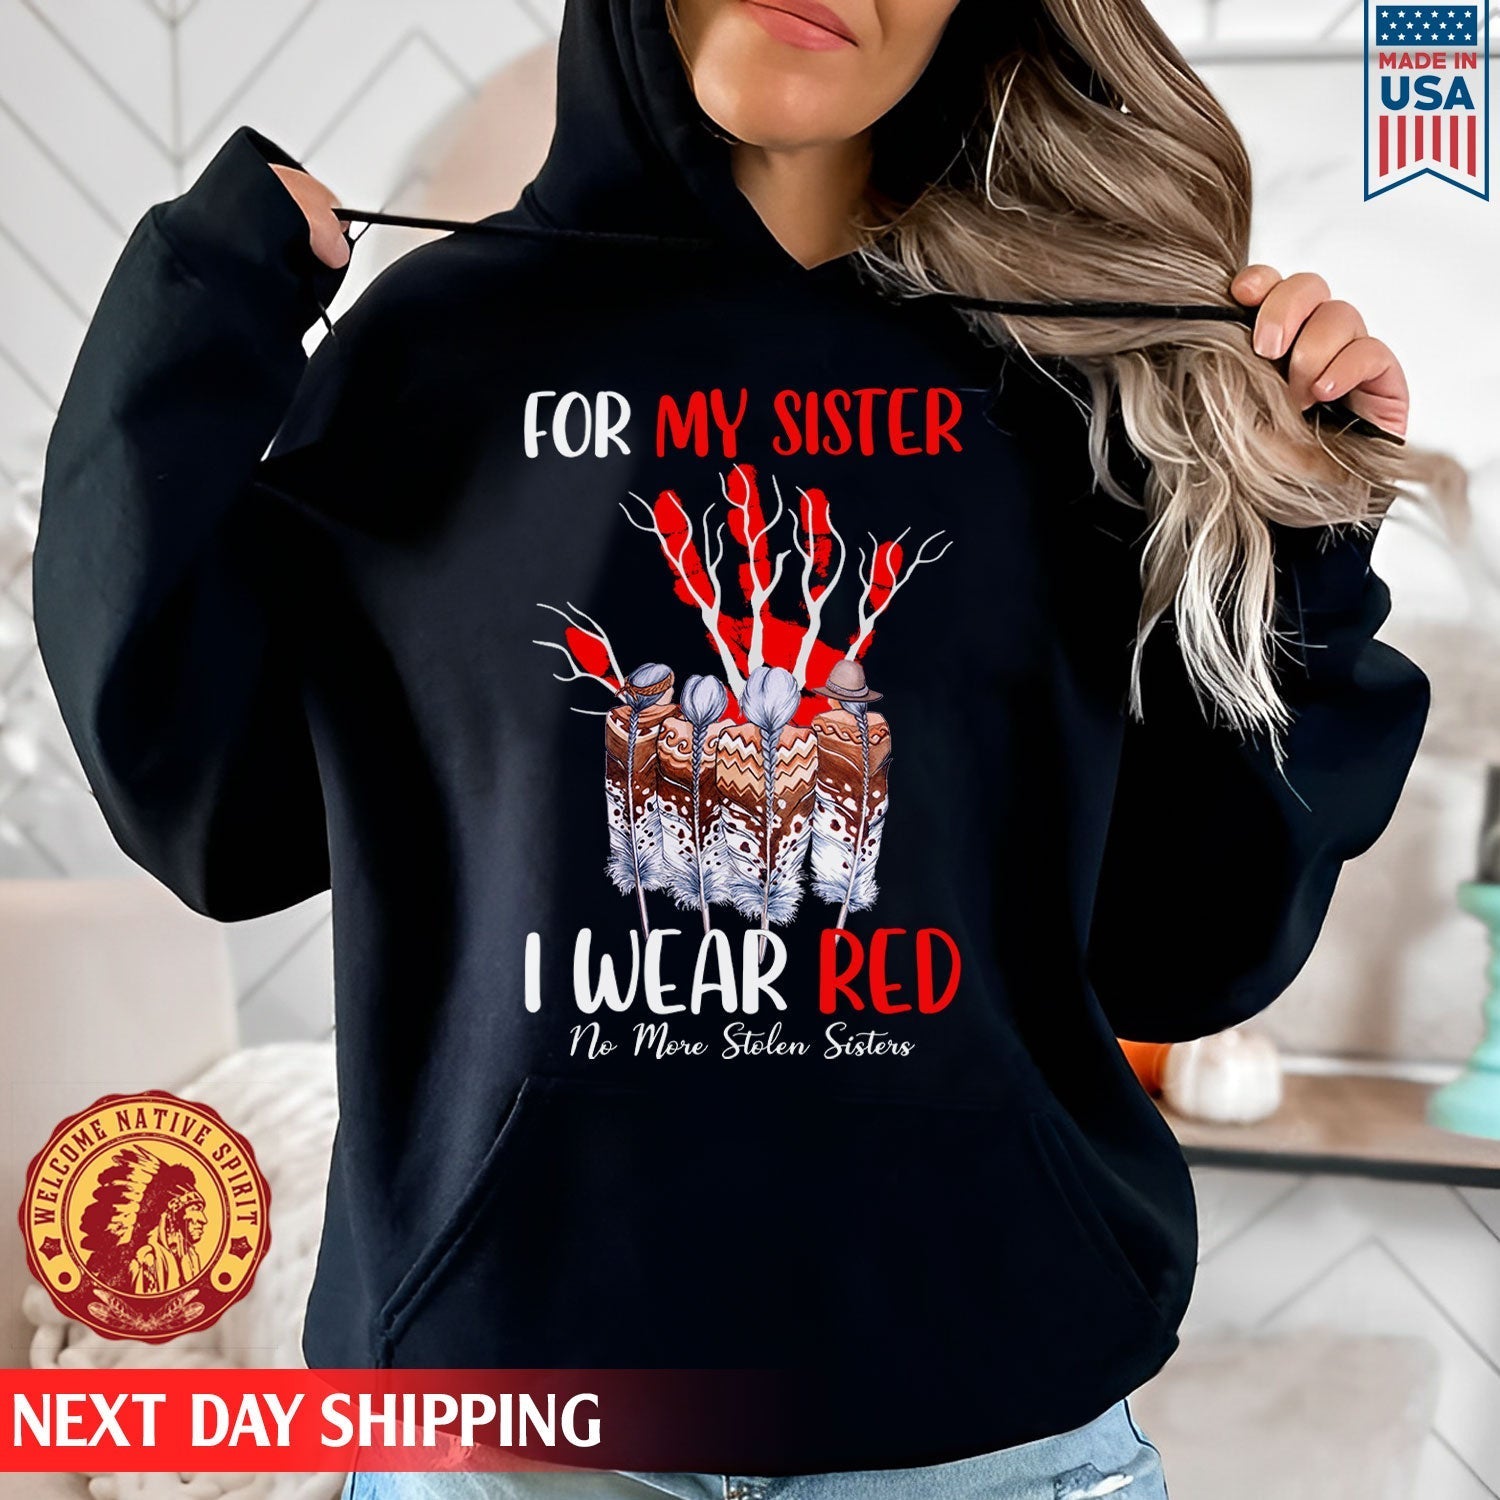 For My Sisters I Wear Red, No More Stolen Sisters MMIW Unisex T-Shirt/Hoodie/Sweatshirt